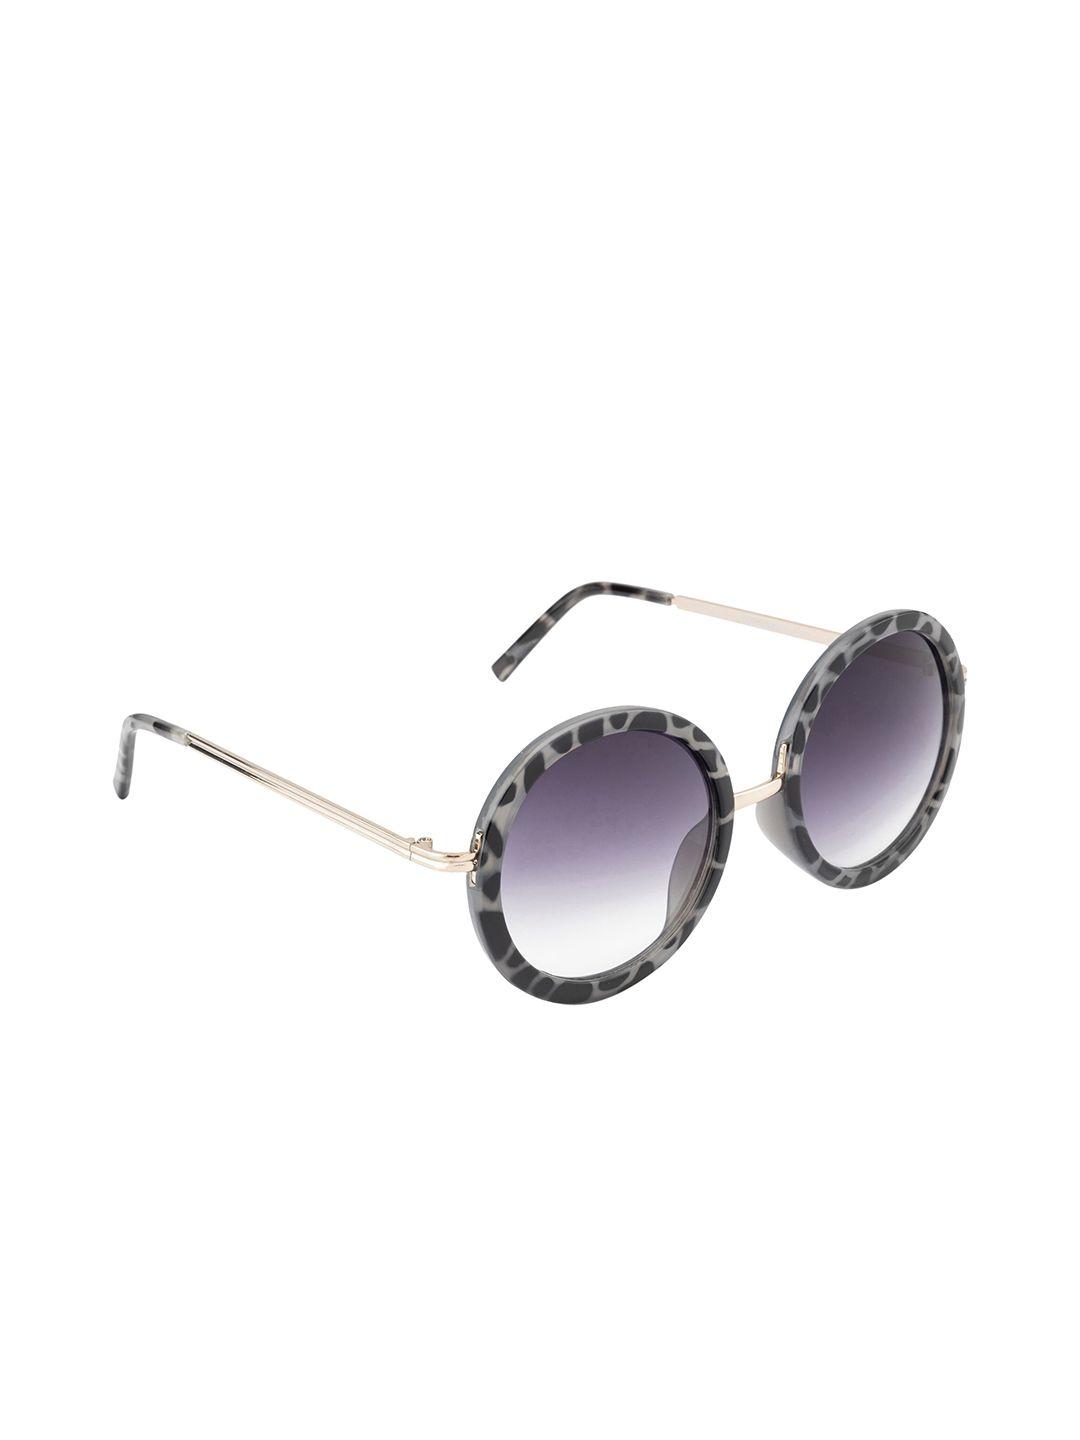 wrogn unisex grey lens & gunmetal-toned round sunglasses with uv protected lens